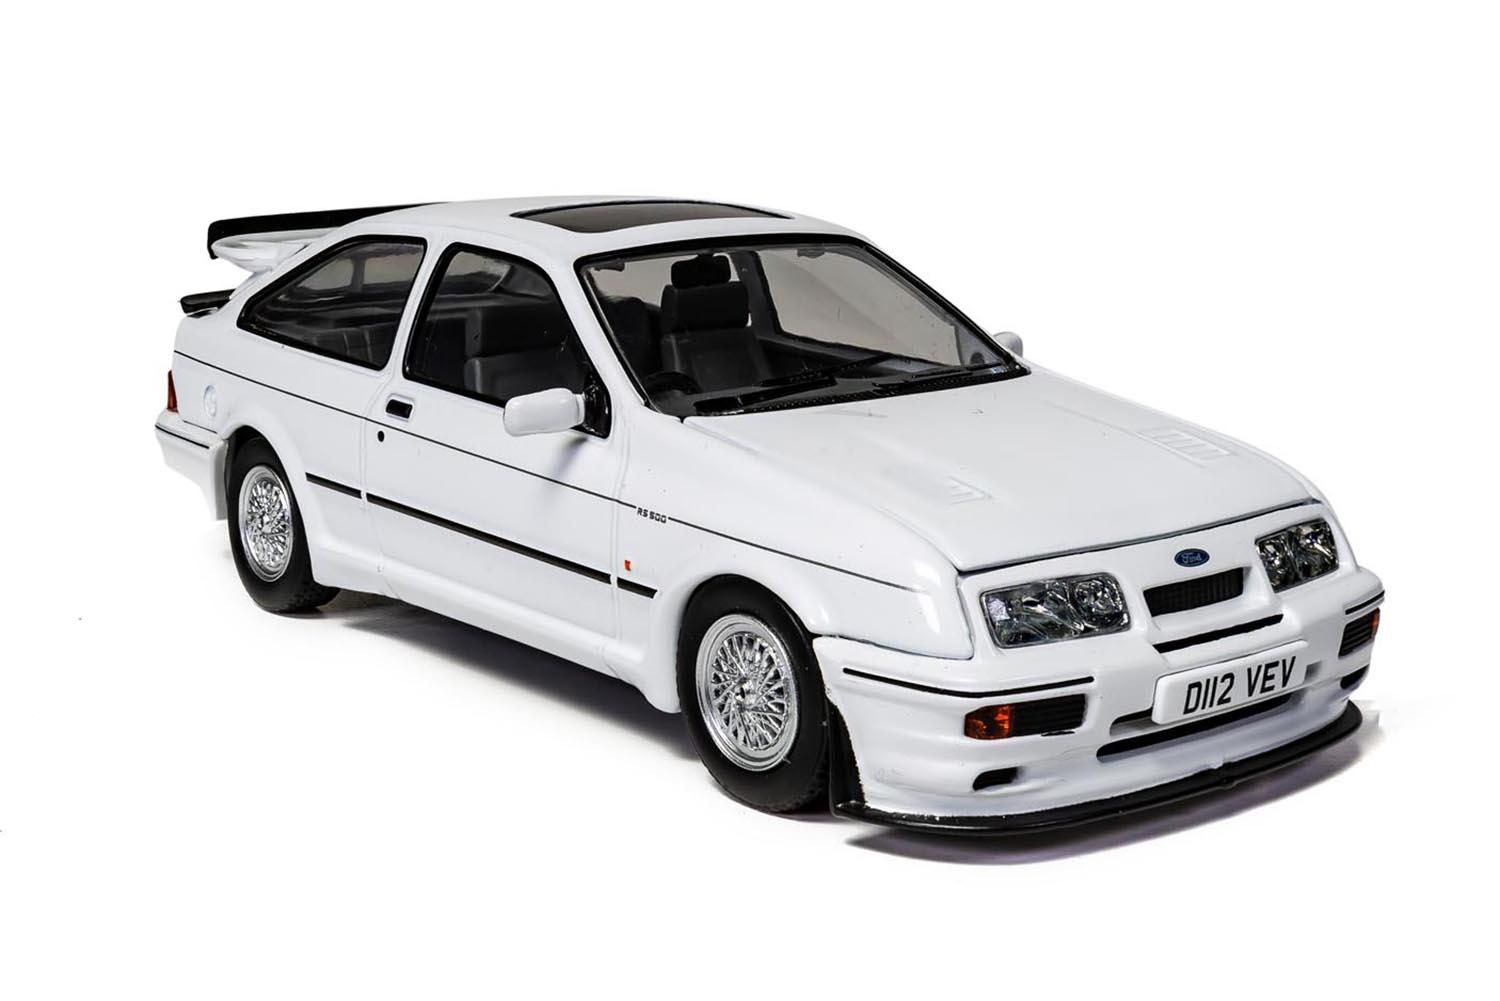 Ford Sierra RS500 Cosworth 1986 in diamond white 1:43 scale model from Corgi Vanguards, VA011707 limited edition model